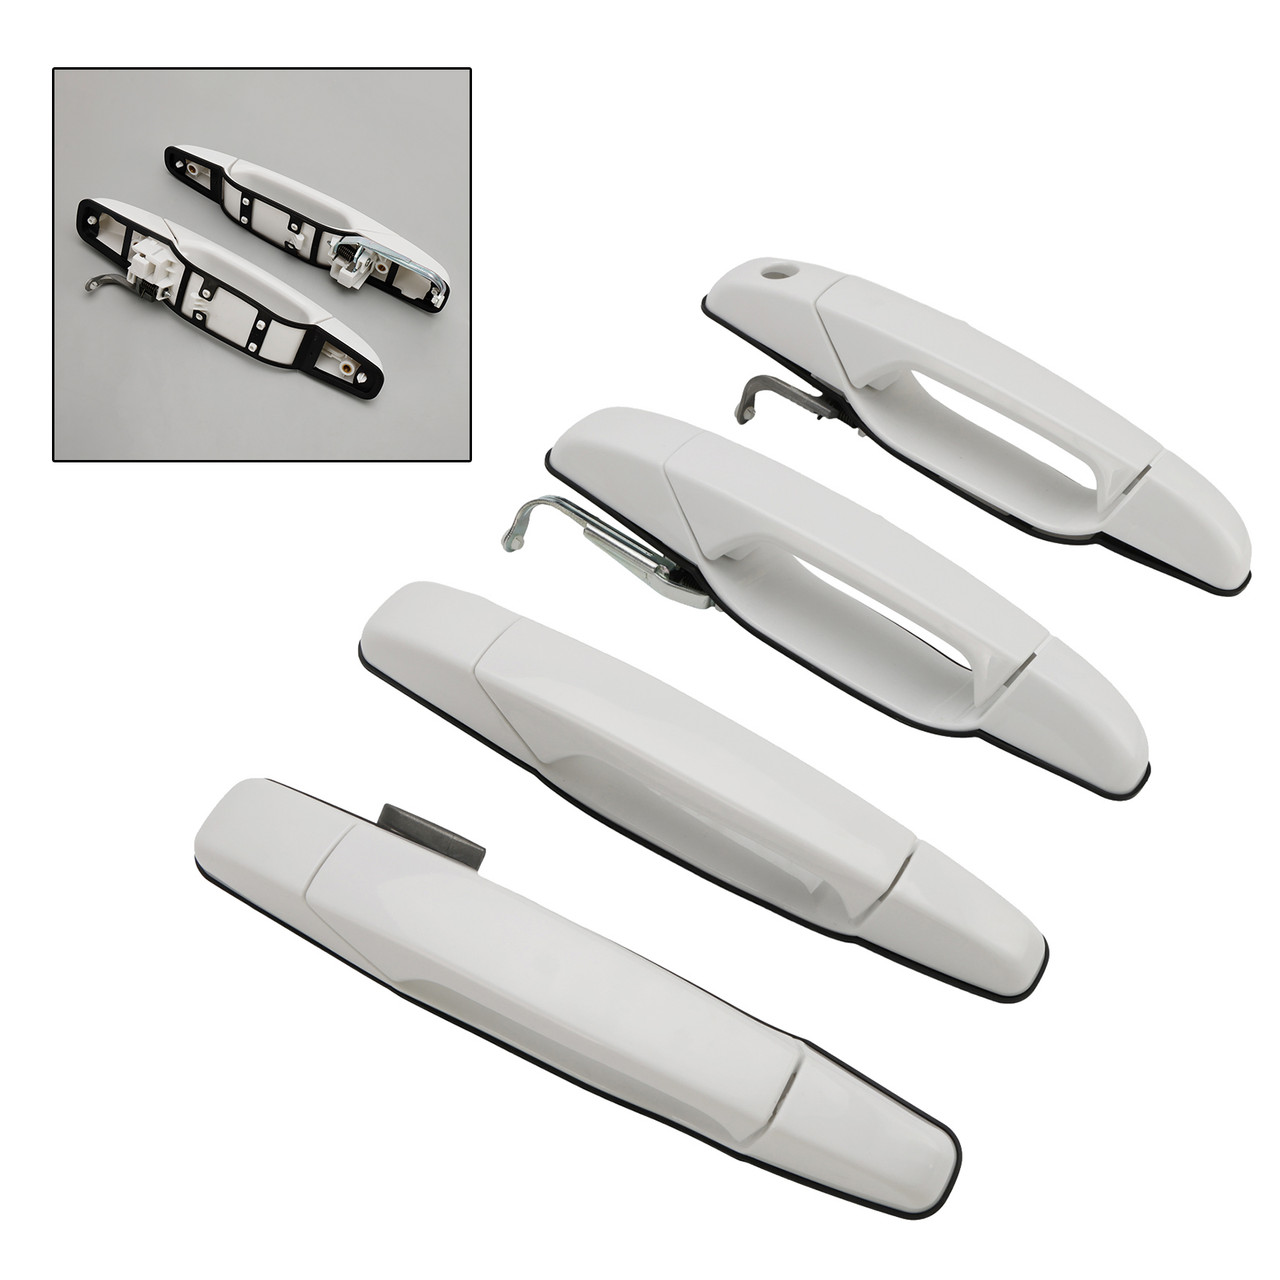 84053446 2007-2013 Cadillac Escalade Base 2007-2012 Chevrolet Avalanche 4PCS Front & Rear Door Handle Set Olympic White